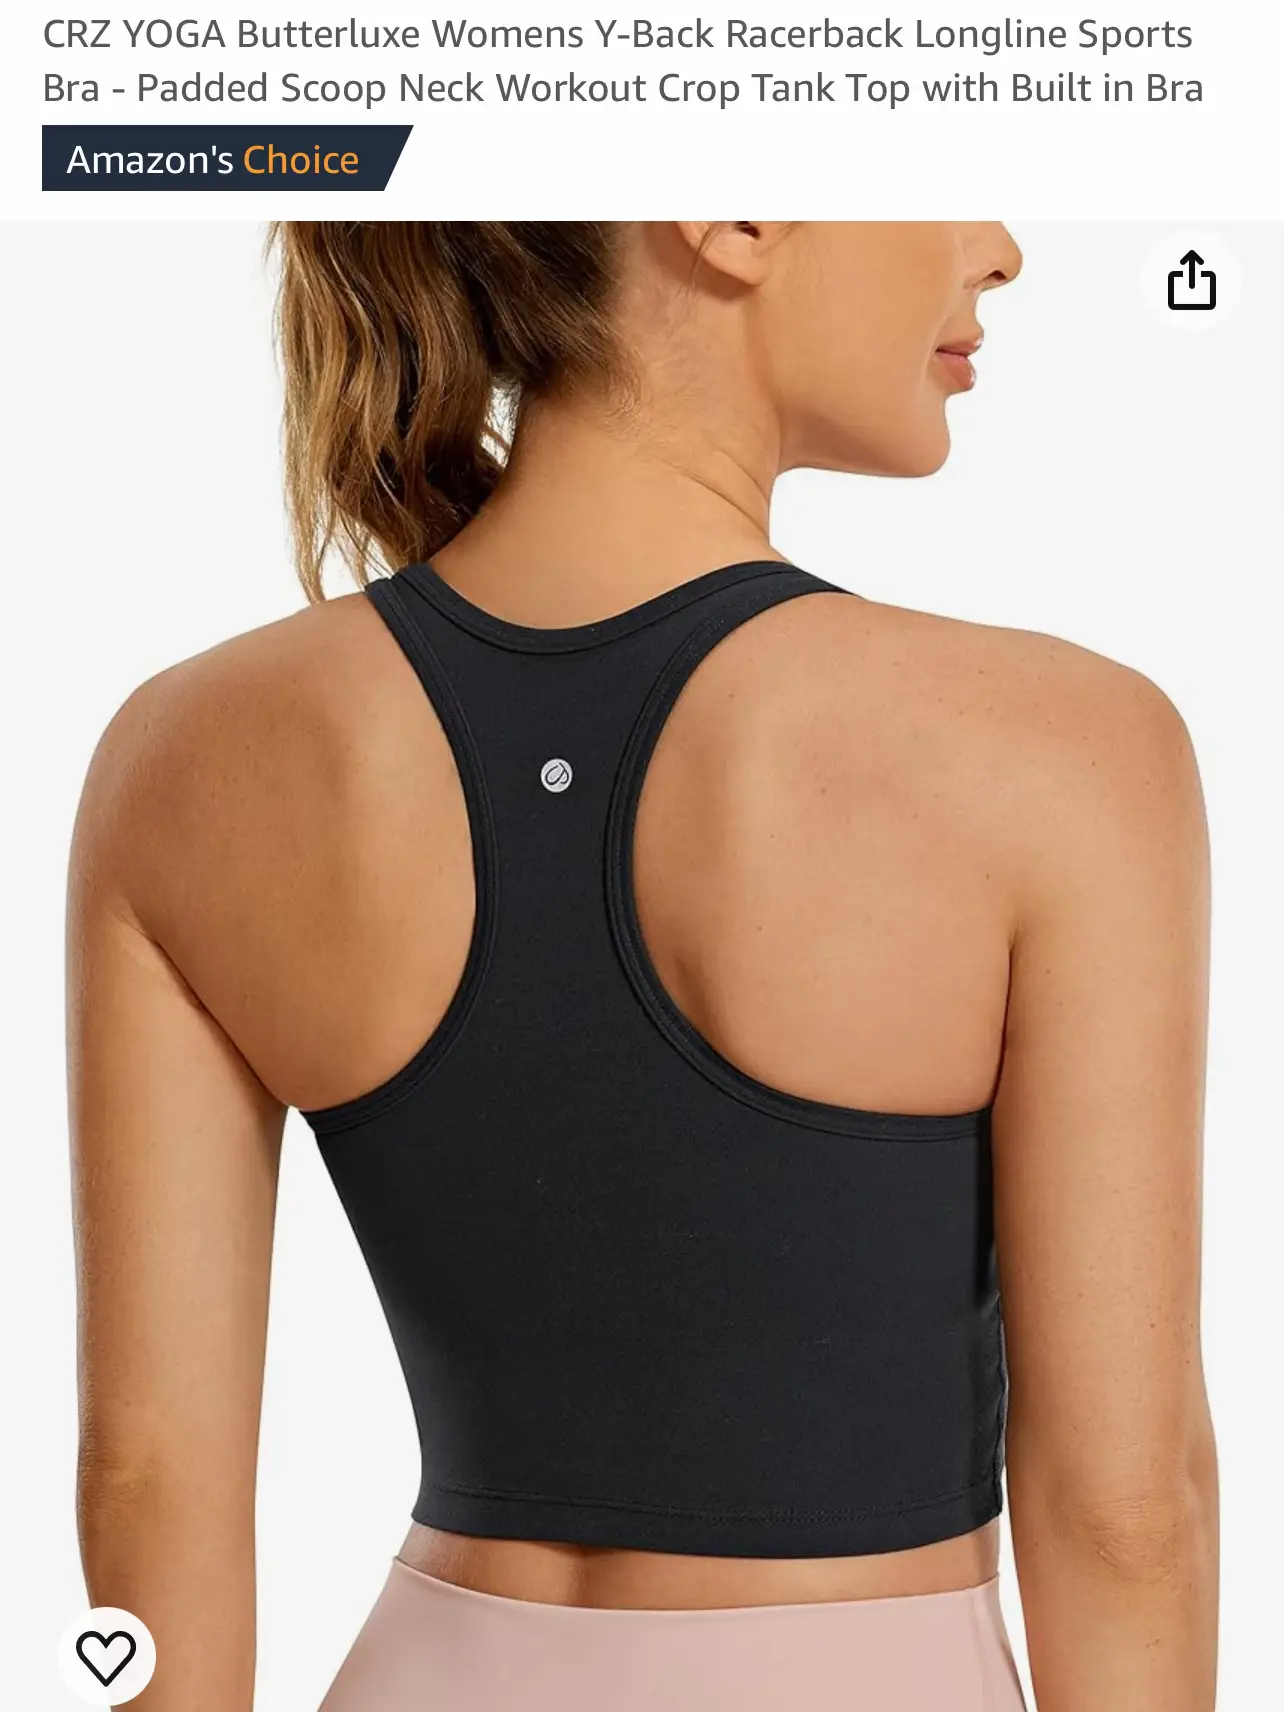 yoga tops for women on a budget - Lemon8 Search